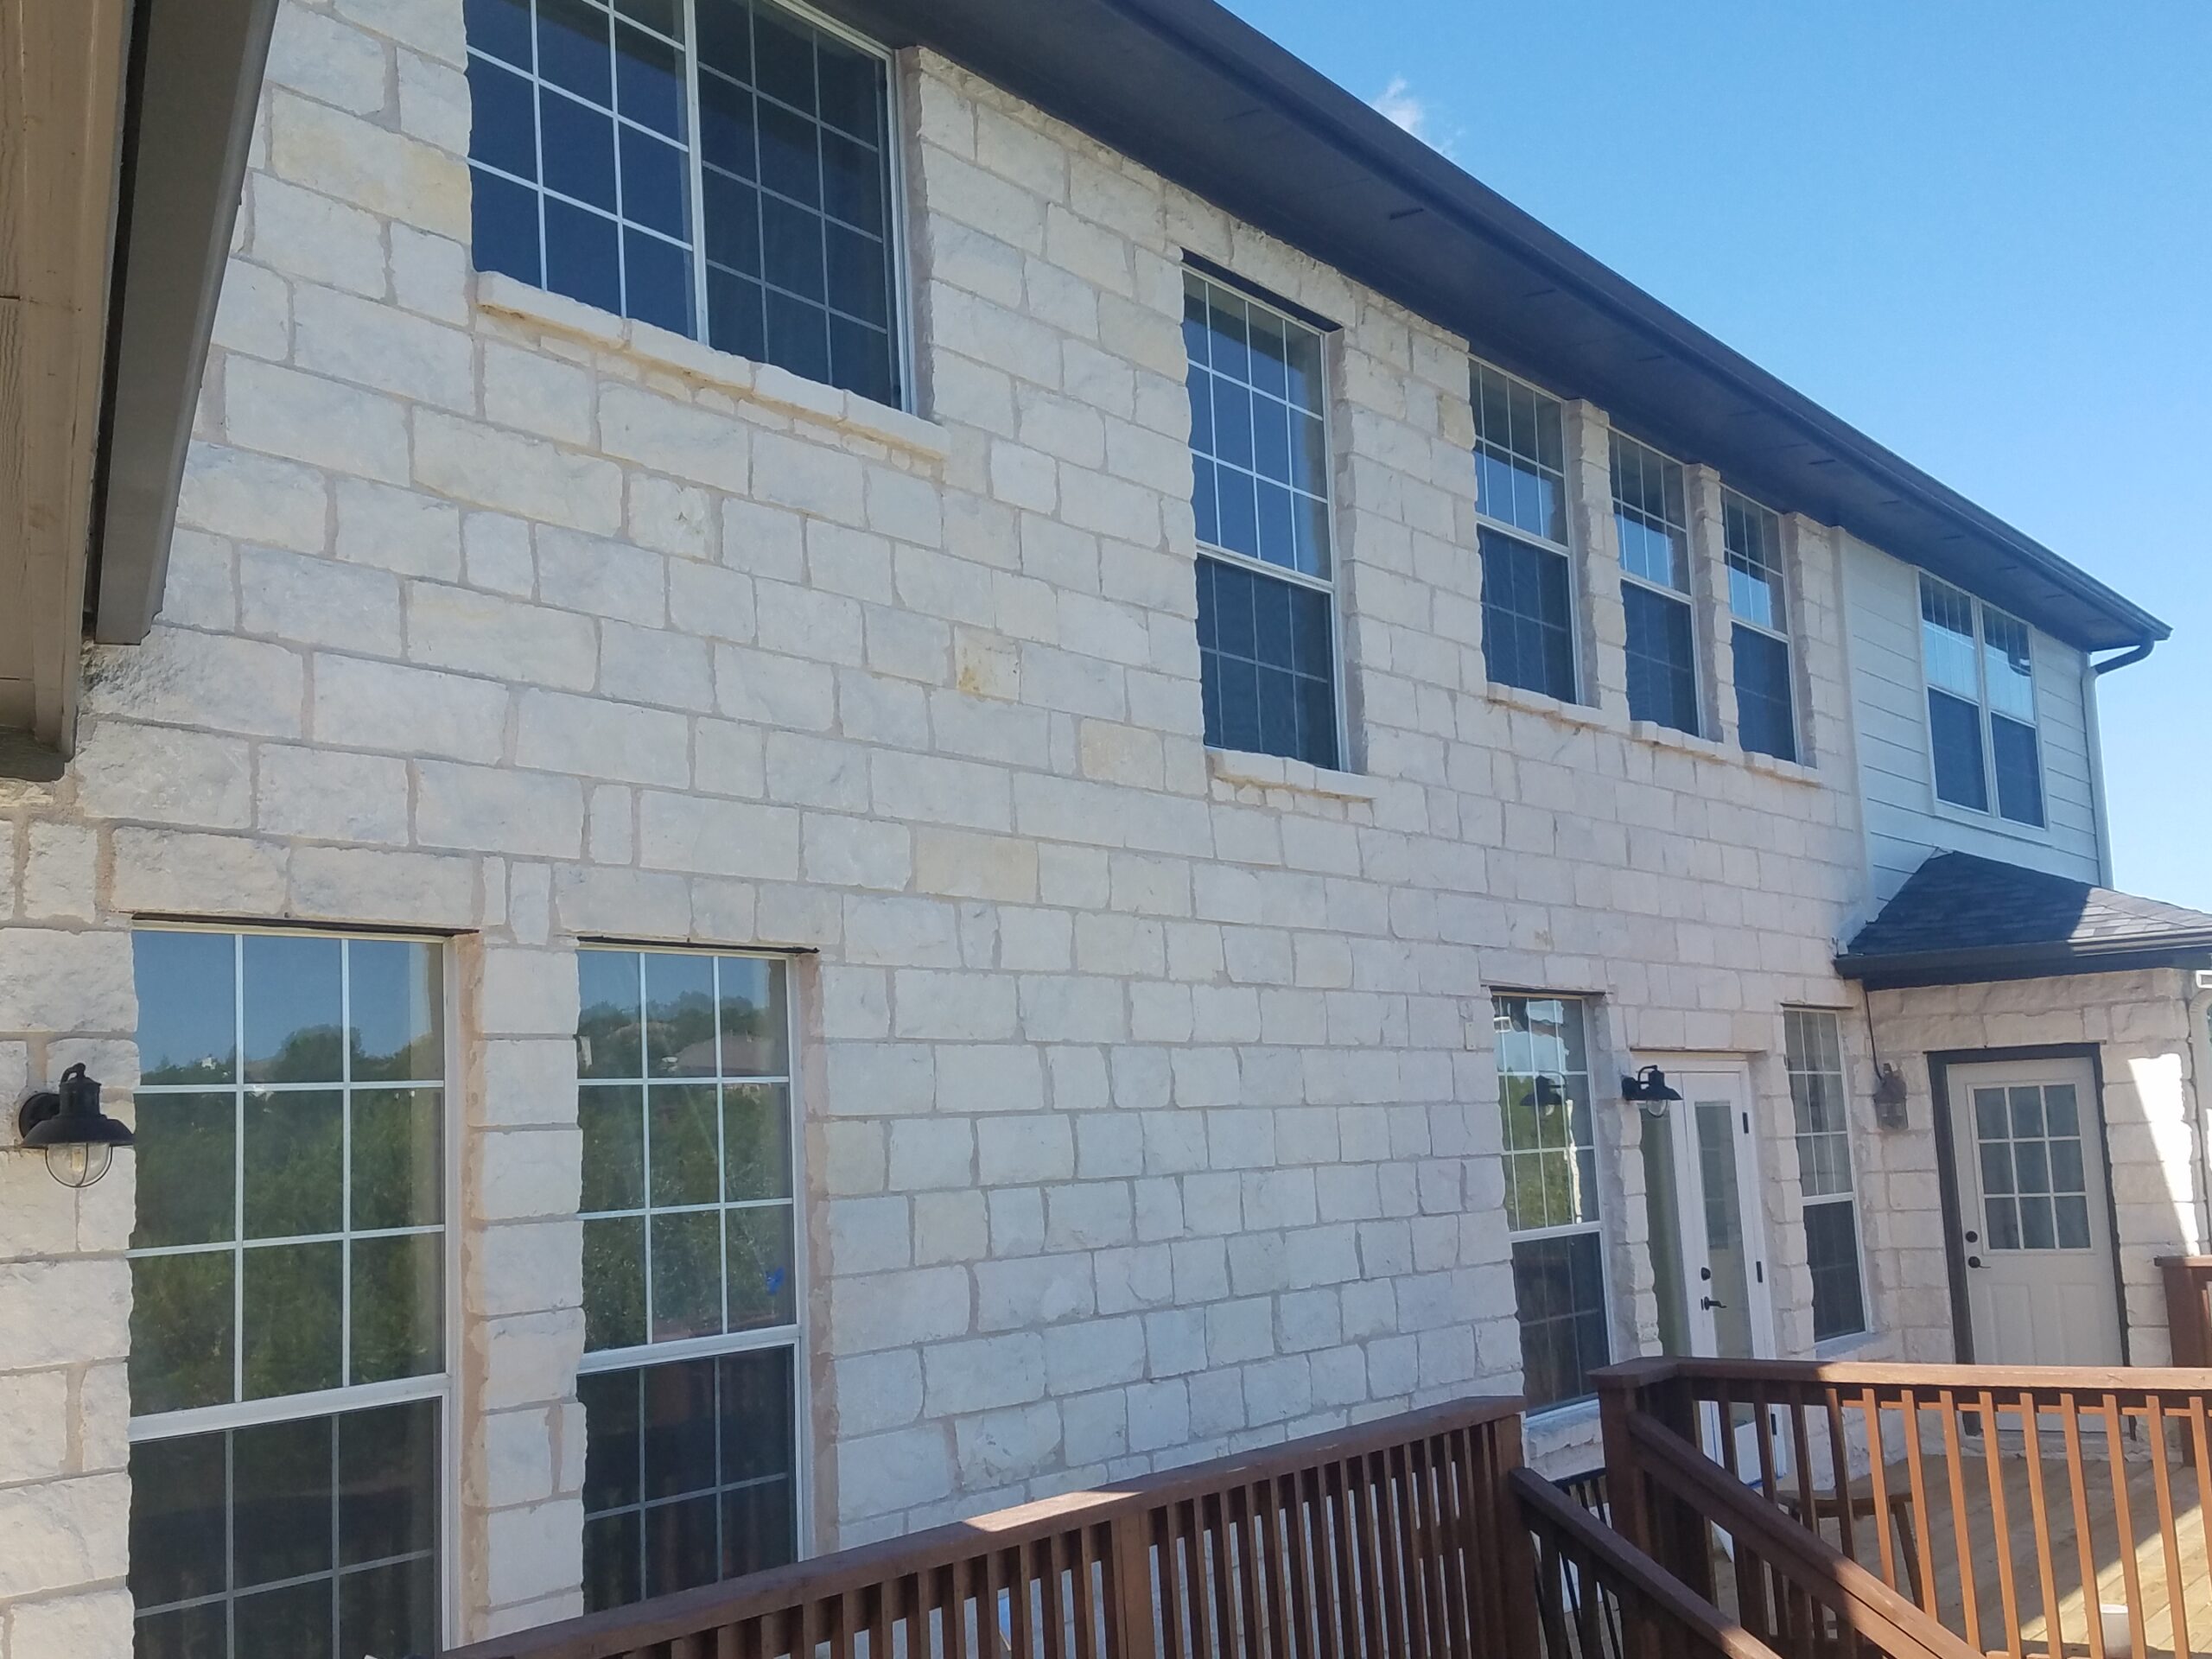 Replacement screens for windows, Austin TX